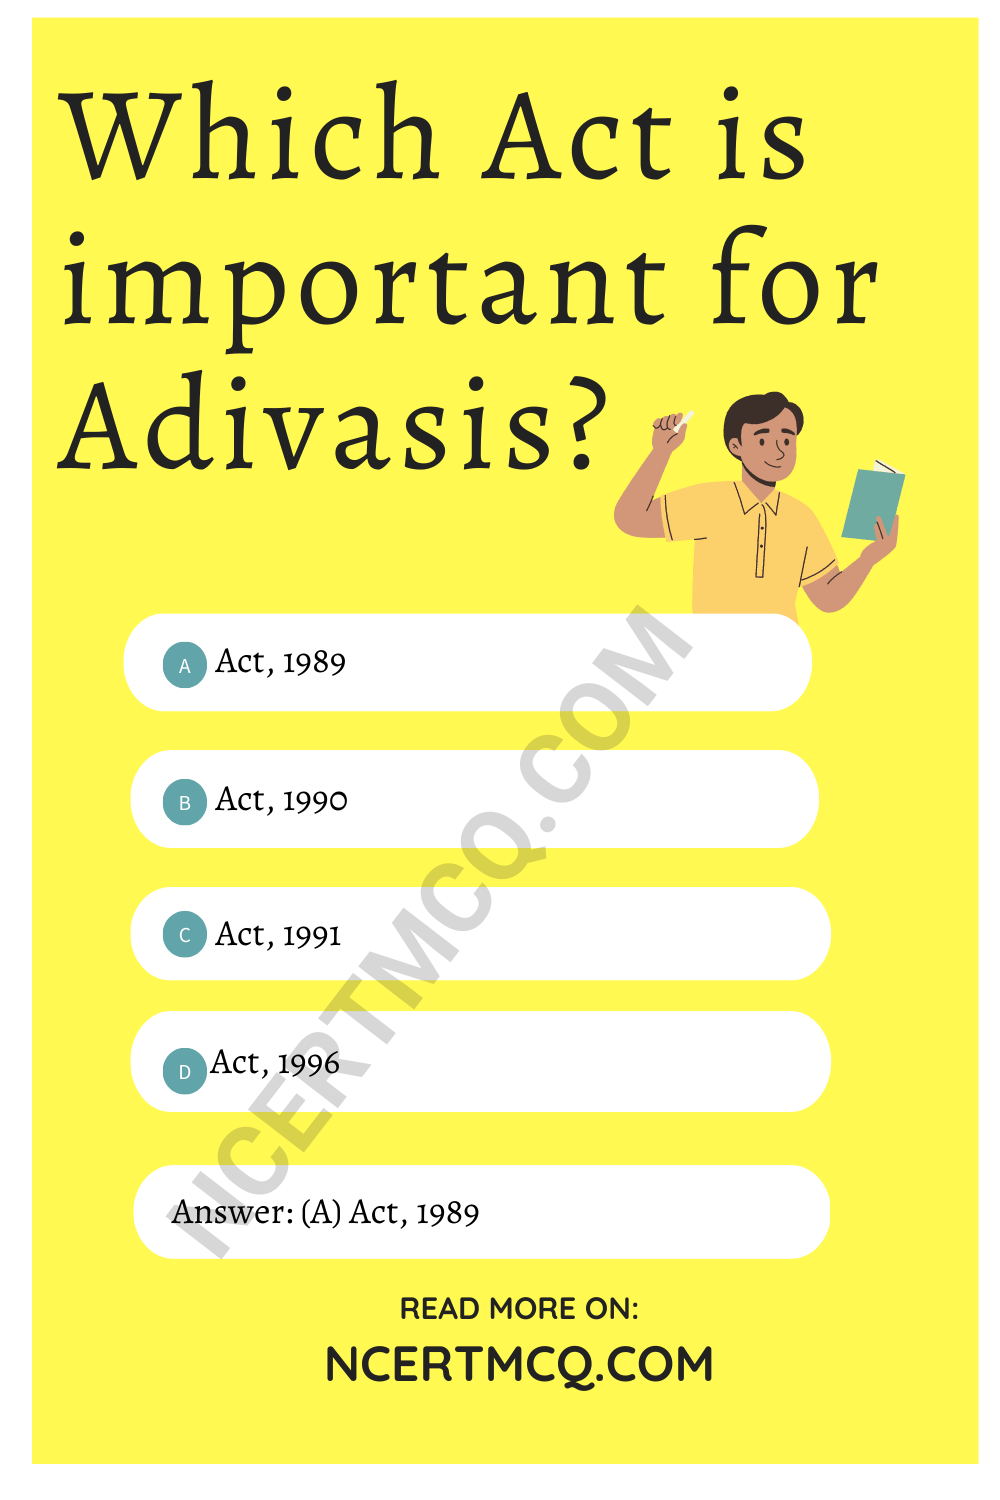 Which Act is important for Adivasis?